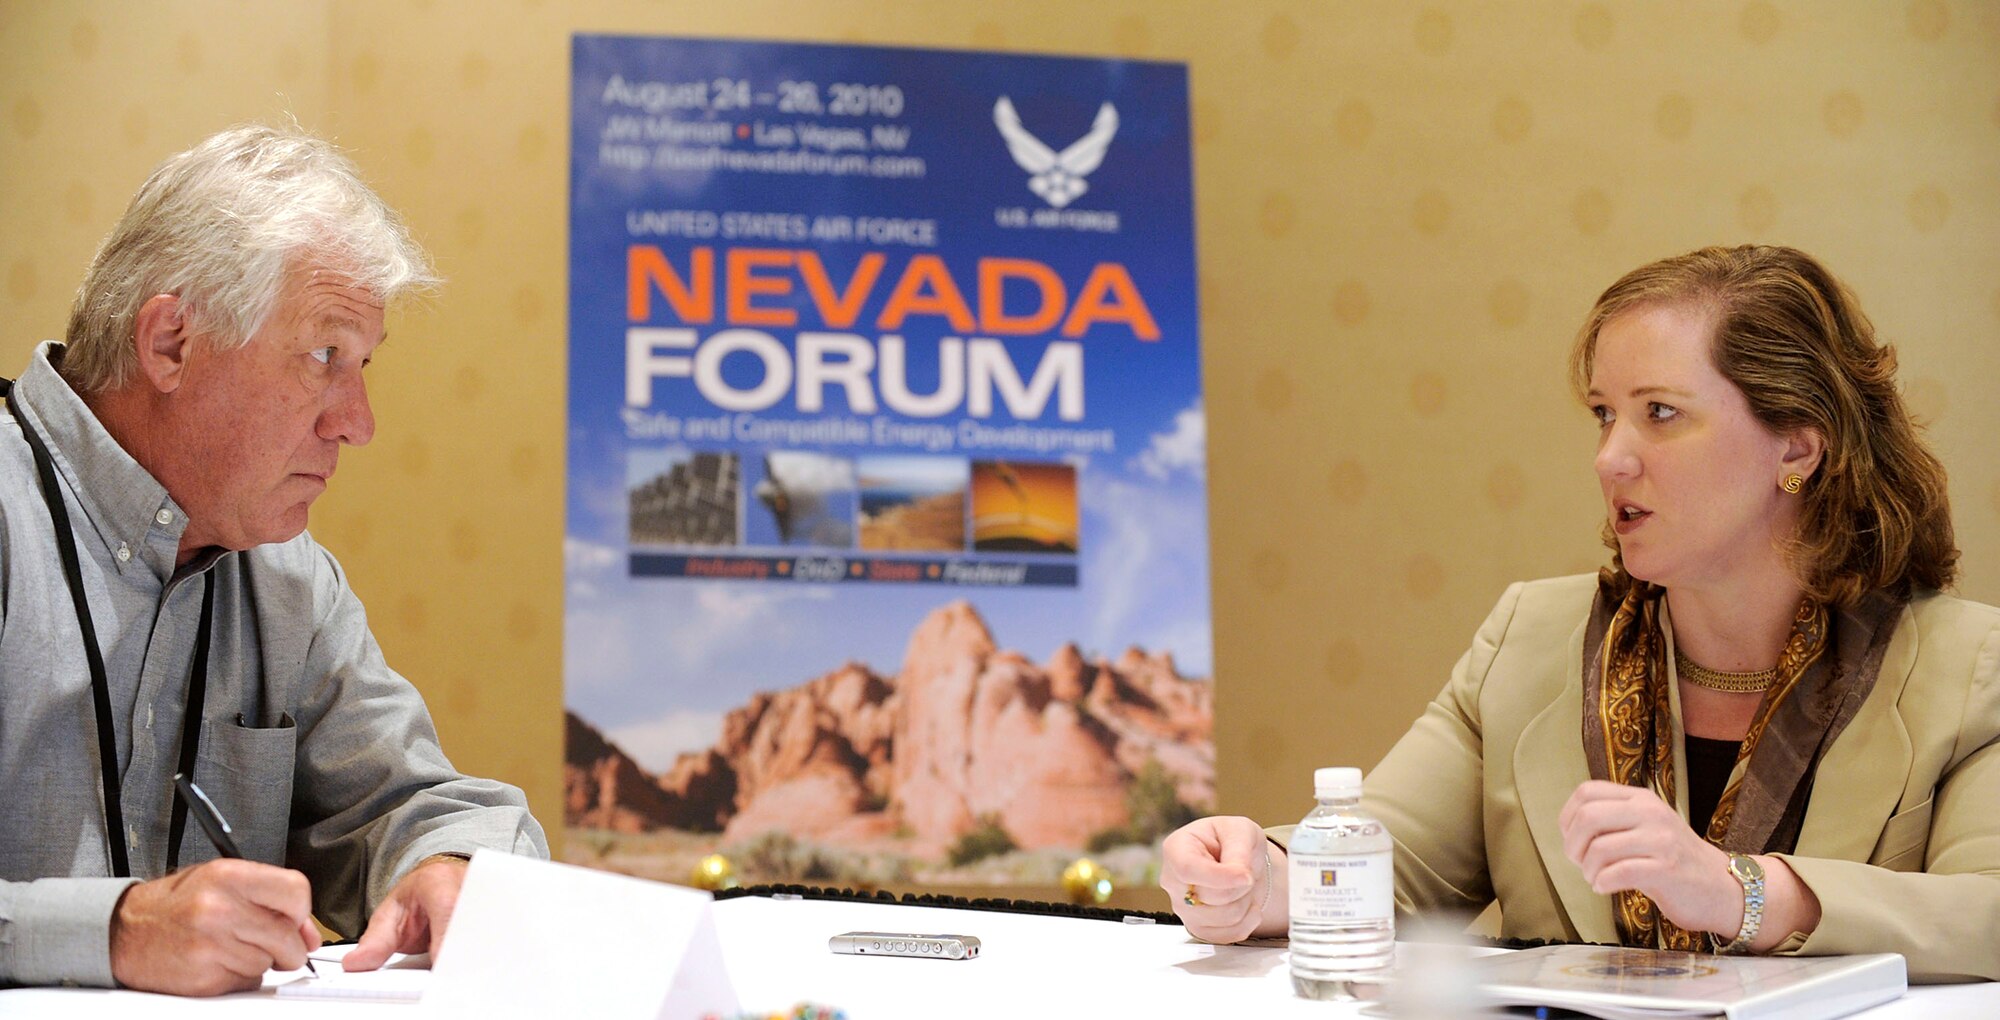 Undersecretary of the Air Force Erin C. Conaton answers a question for Keith Rogers, a reporter with the Las Vegas Review Journal, during a media roundtable following the kick-off of the Nevada Energy Forum, an Air Force-hosted three-day brainstorming to find ways for the service to reduce fossil fuels usage Aug. 24, 2010, in Las Vegas. (U.S. Air Force photo/Scott M. Ash)